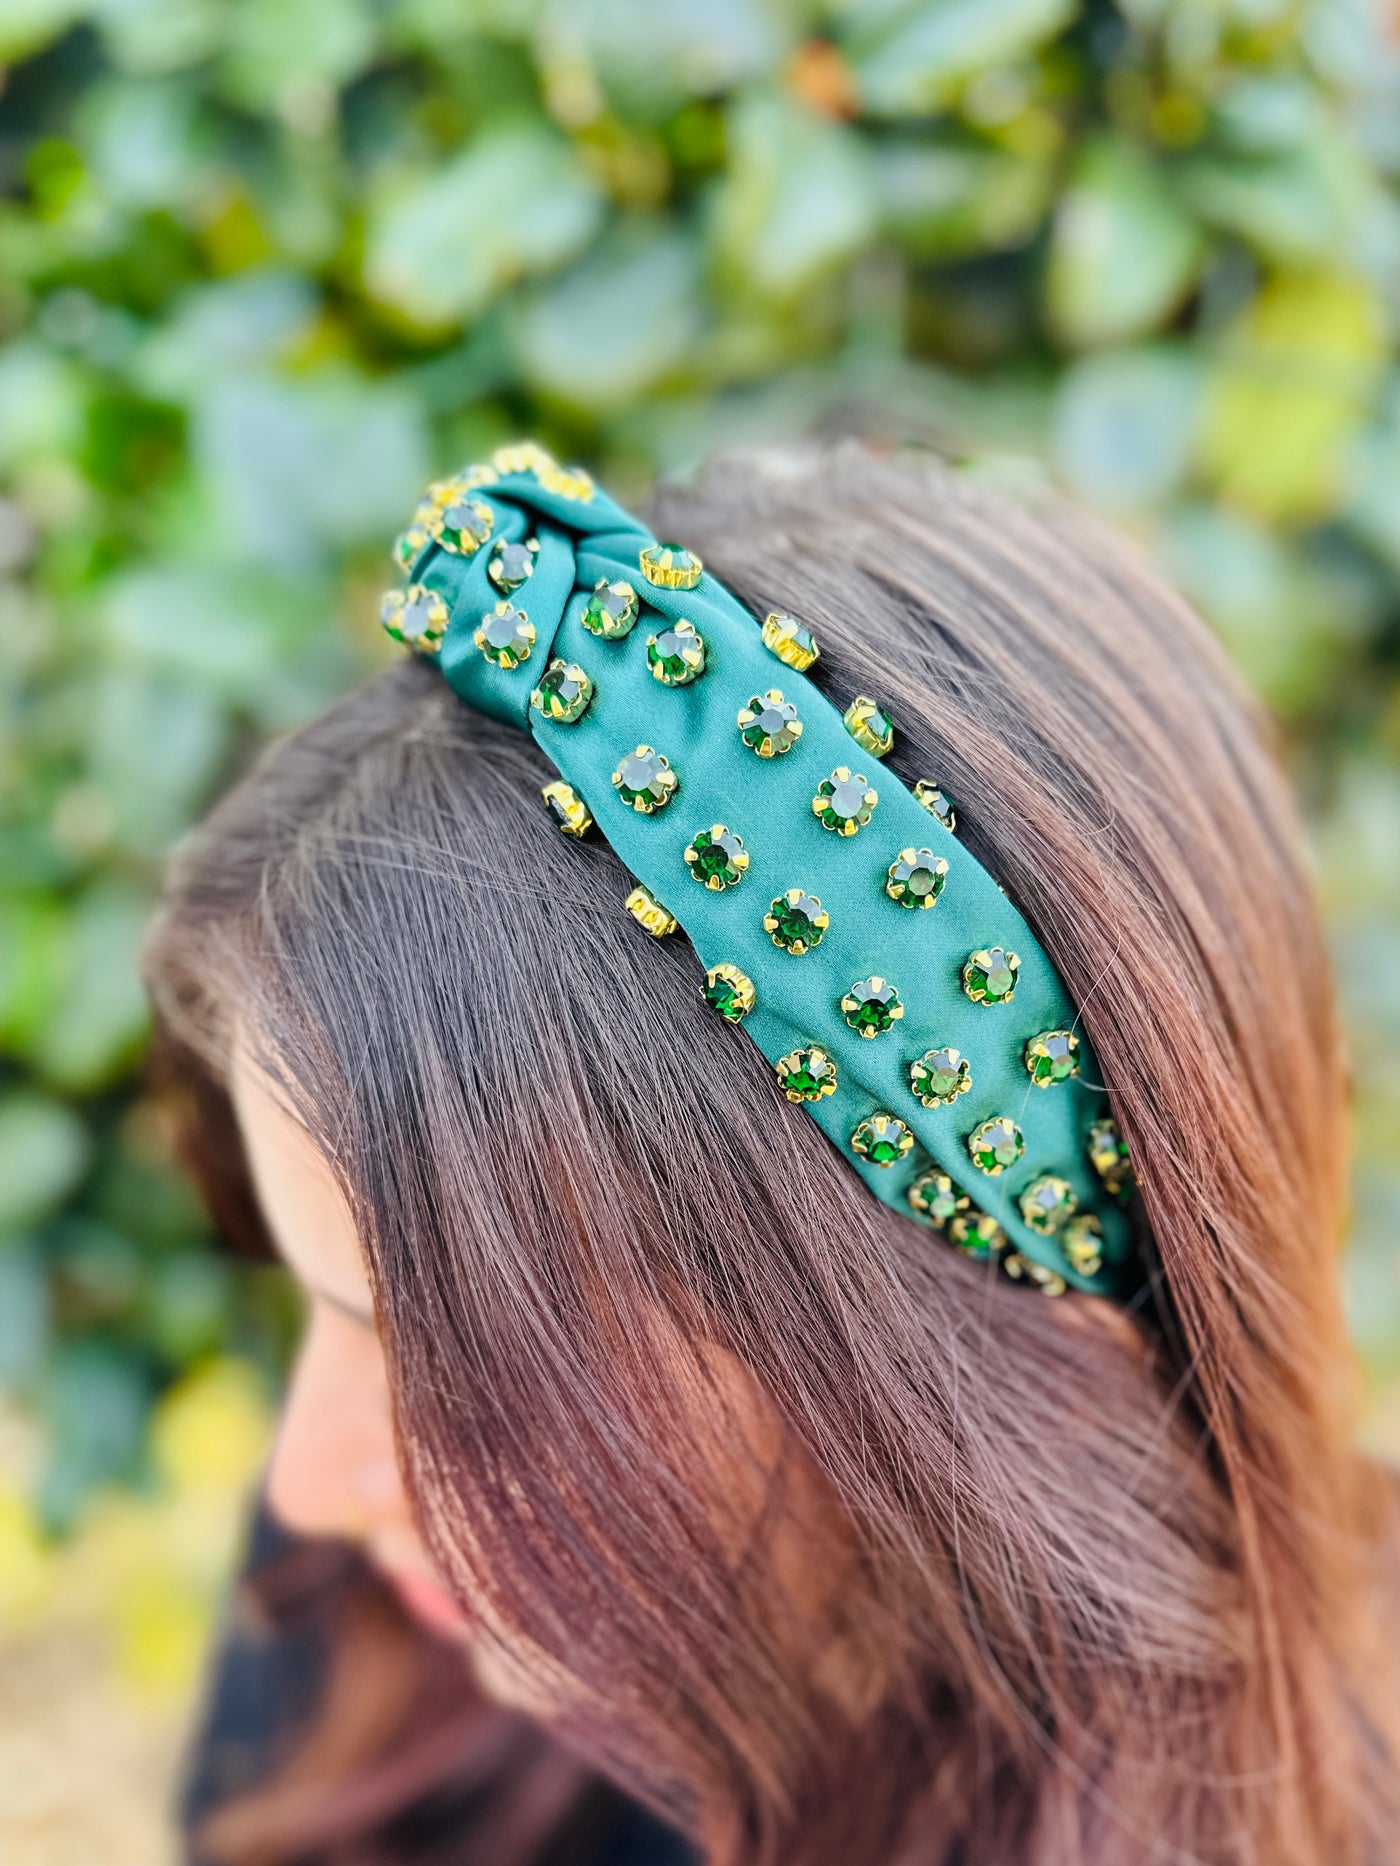 It's About Time Rhinestone Embellished Headband • Emerald-DMC-Shop Anchored Bliss Women's Boutique Clothing Store